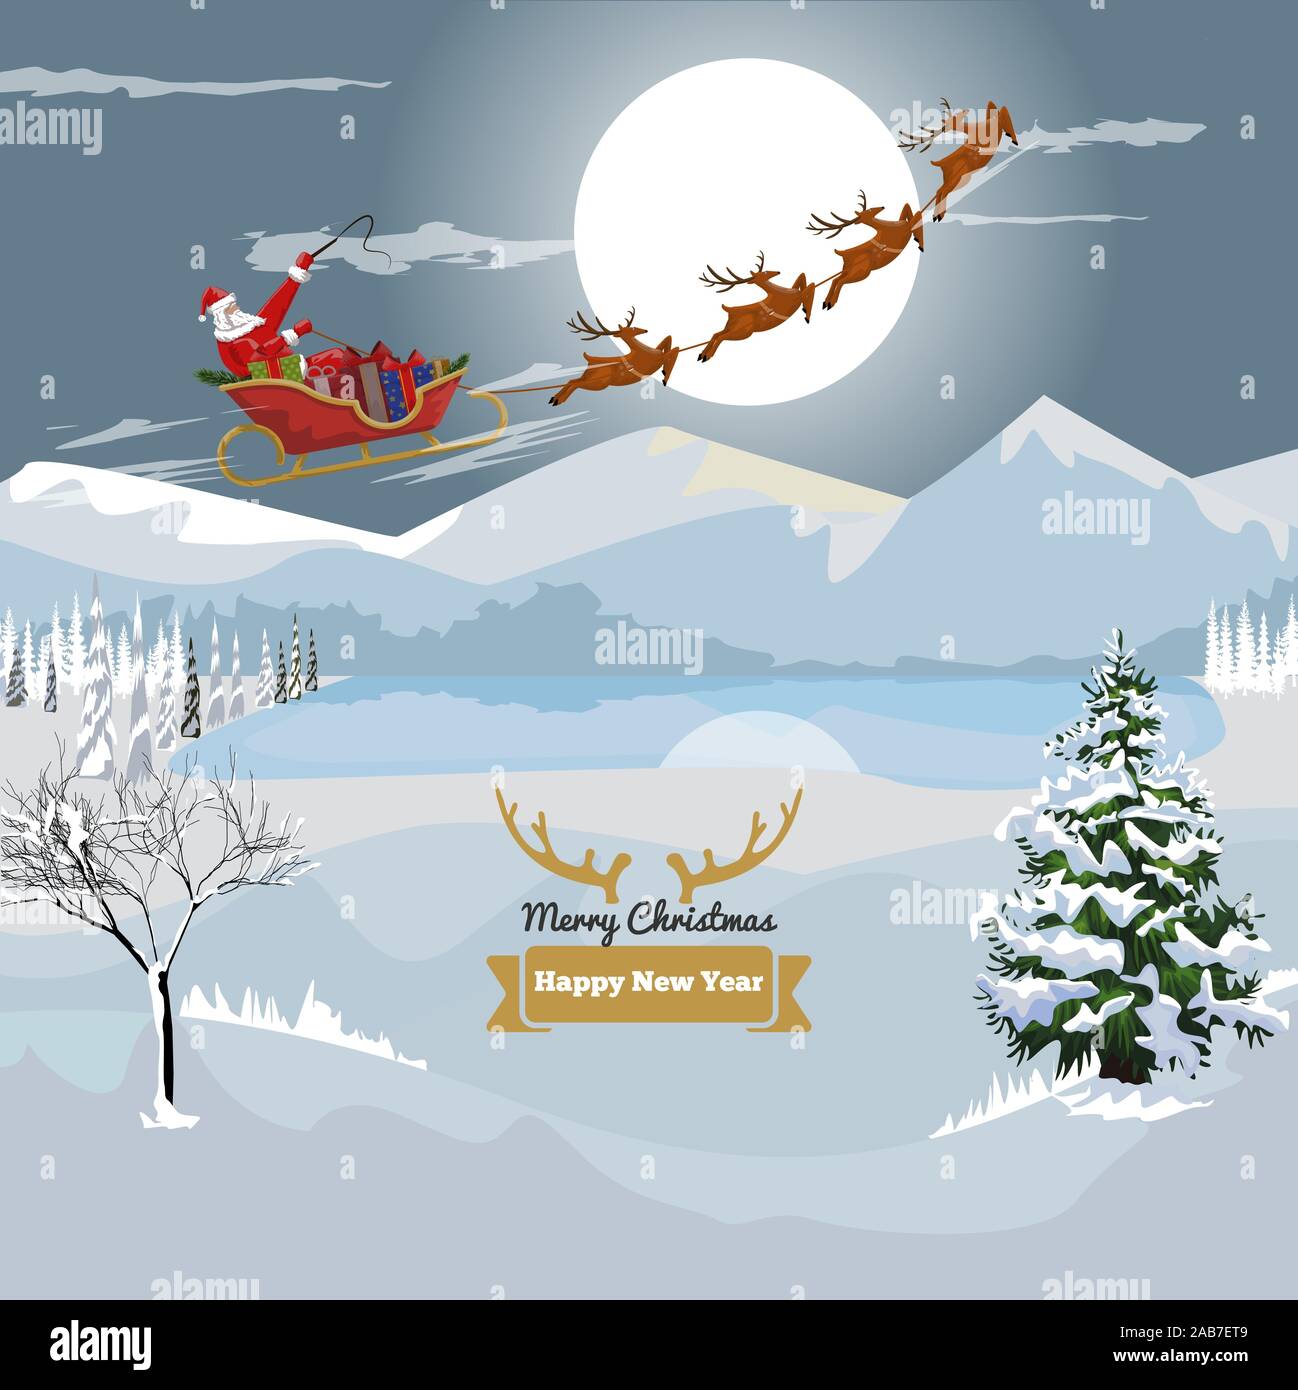 Santa claus flying with sleigh and reindeers over winter landscape scenery for your design with copyspace. Vector illustration. Stock Vector